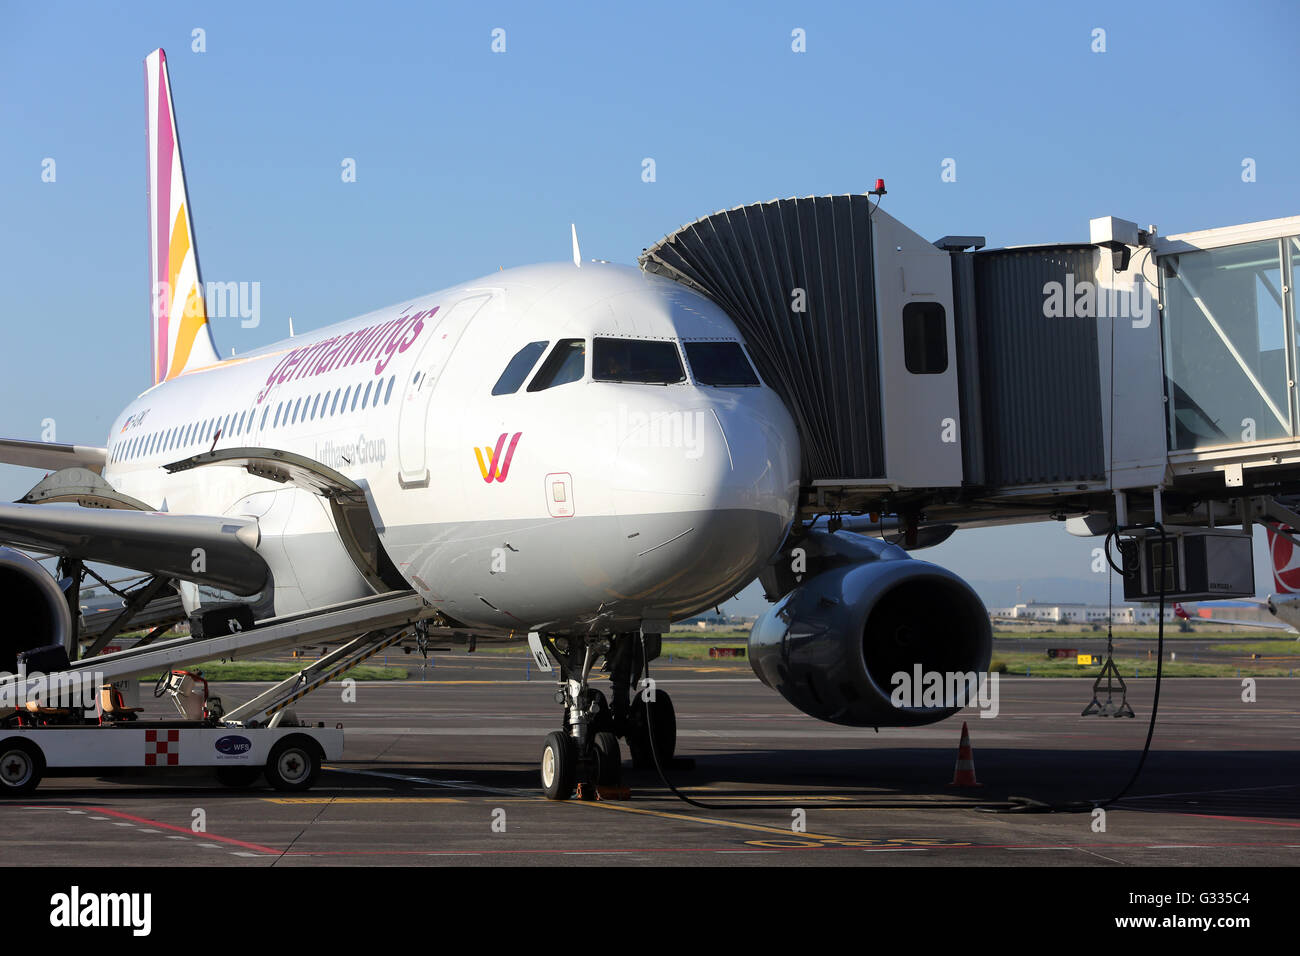 Catania, Italy, the airplane German Wings is in park position at a jet bridge Stock Photo